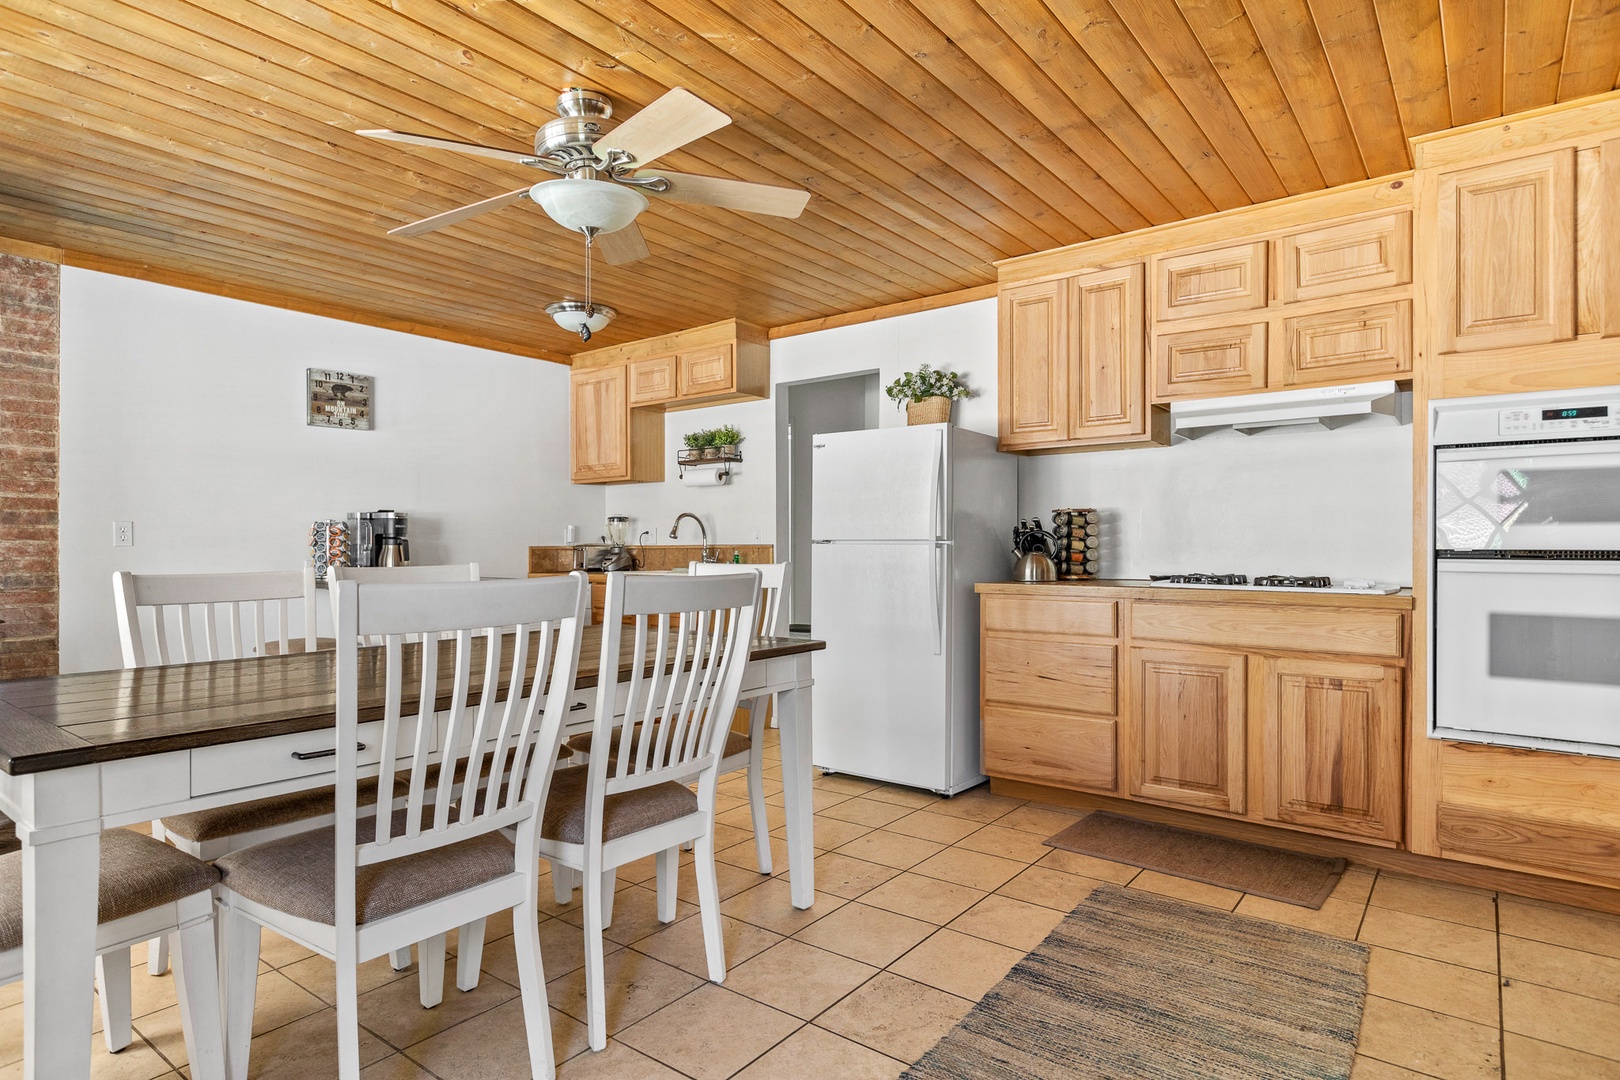 Dining and fully equipped kitchen